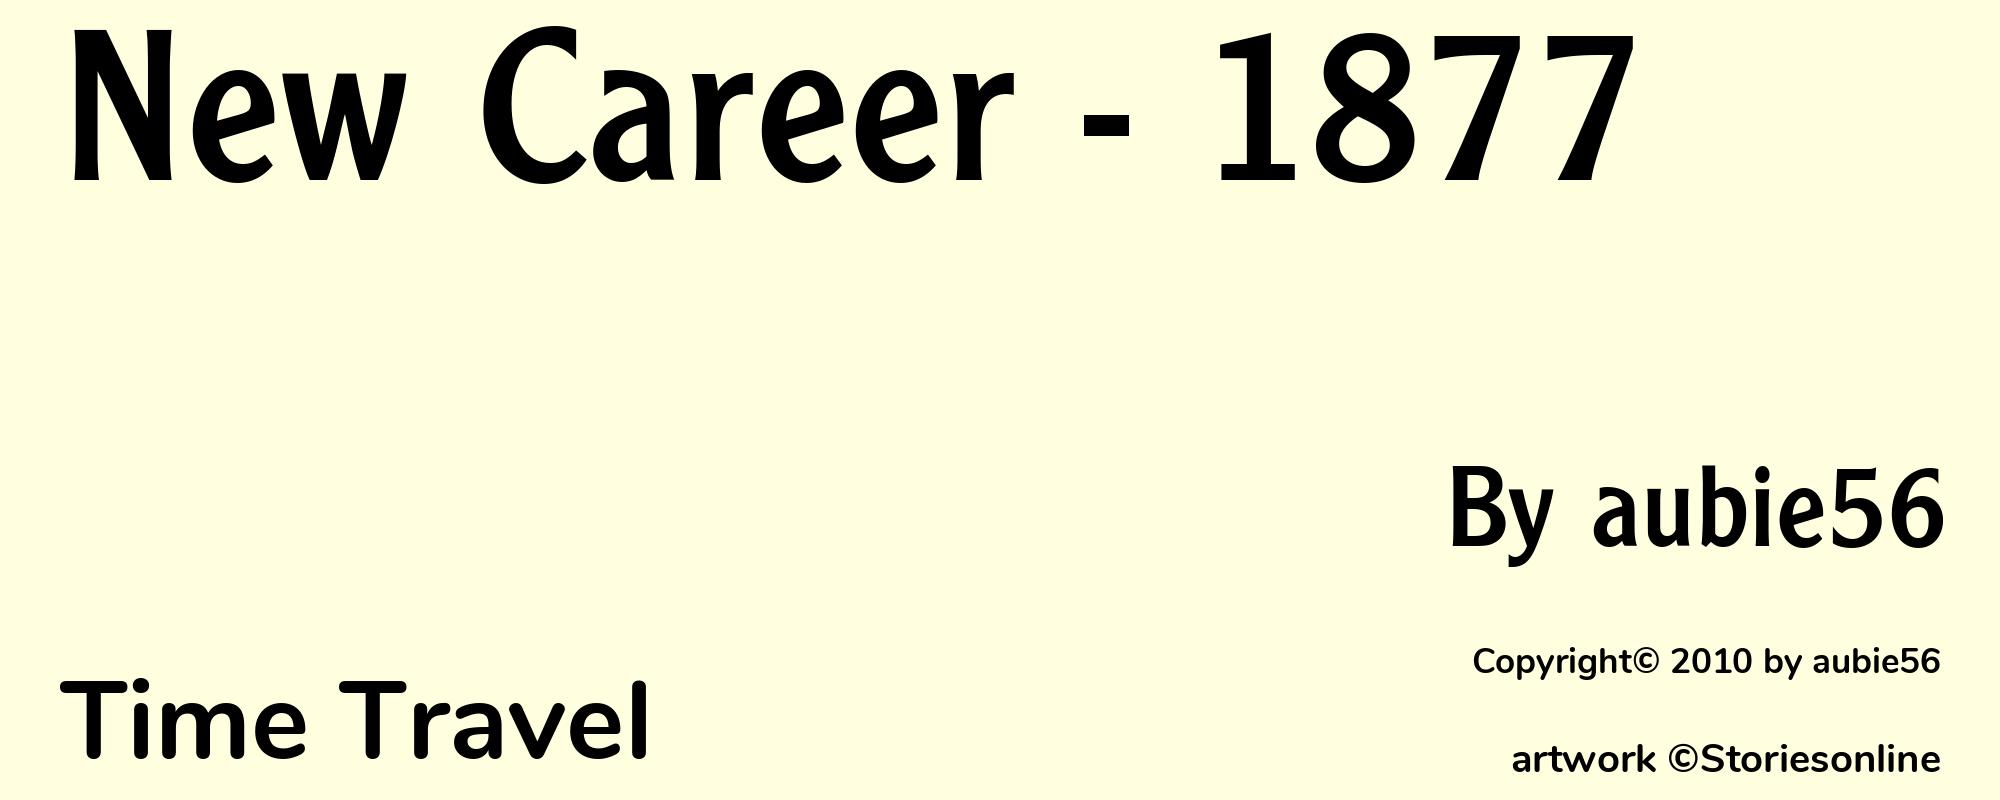 New Career - 1877 - Cover